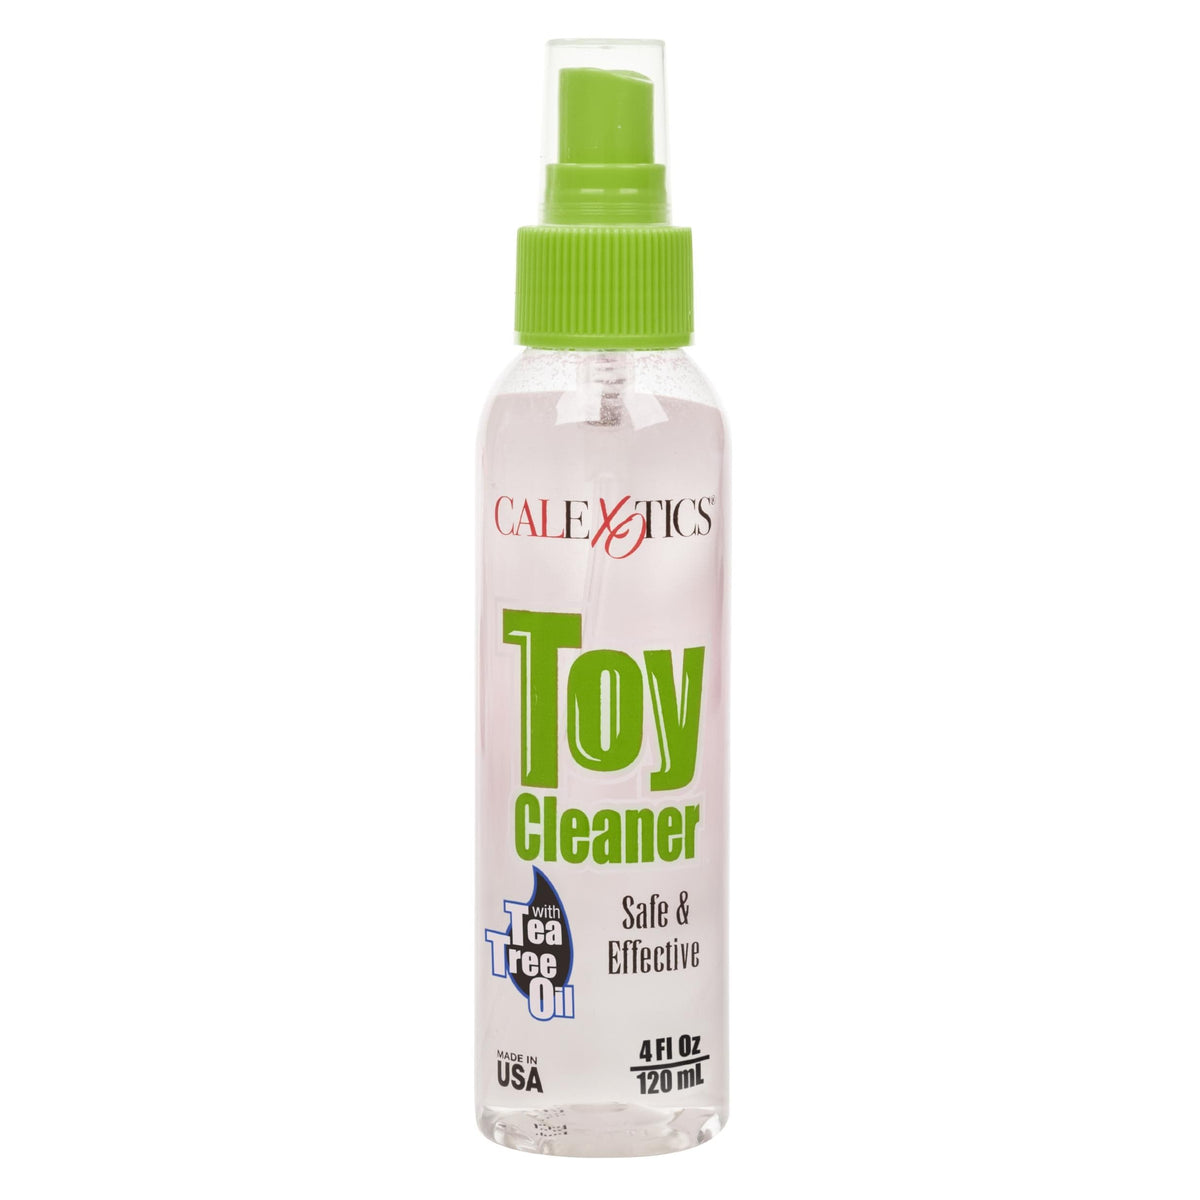 sex toy cleaner, cleaning sex toys